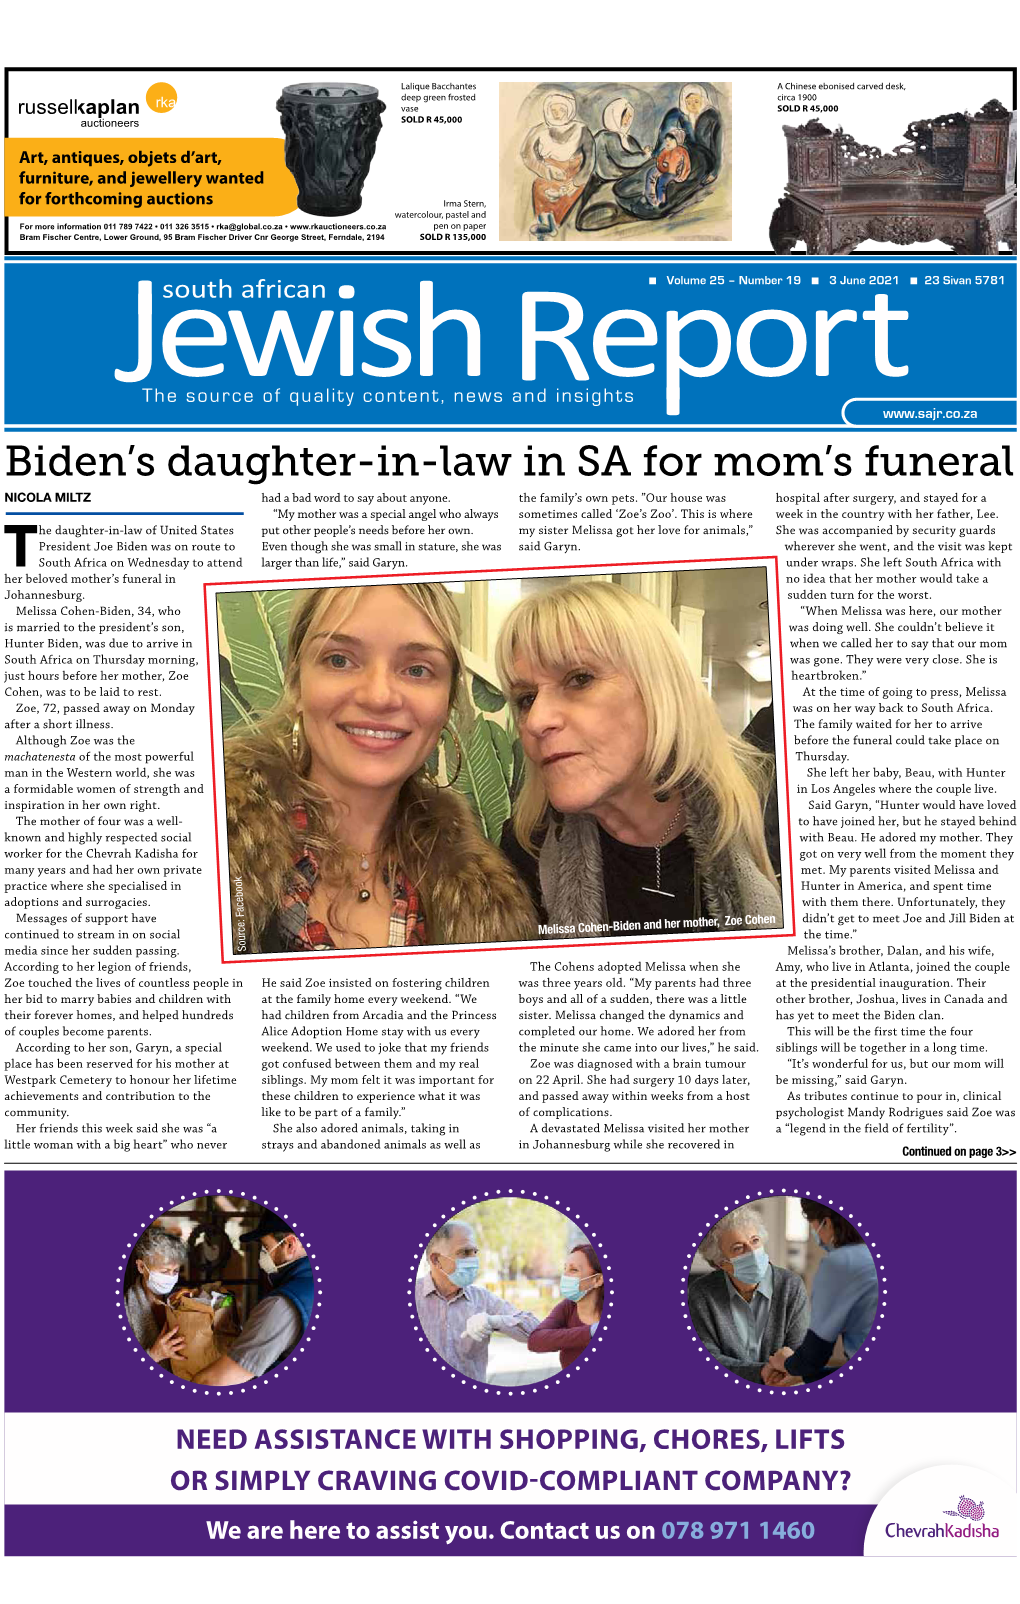 Biden's Daughter-In-Law in SA for Mom's Funeral